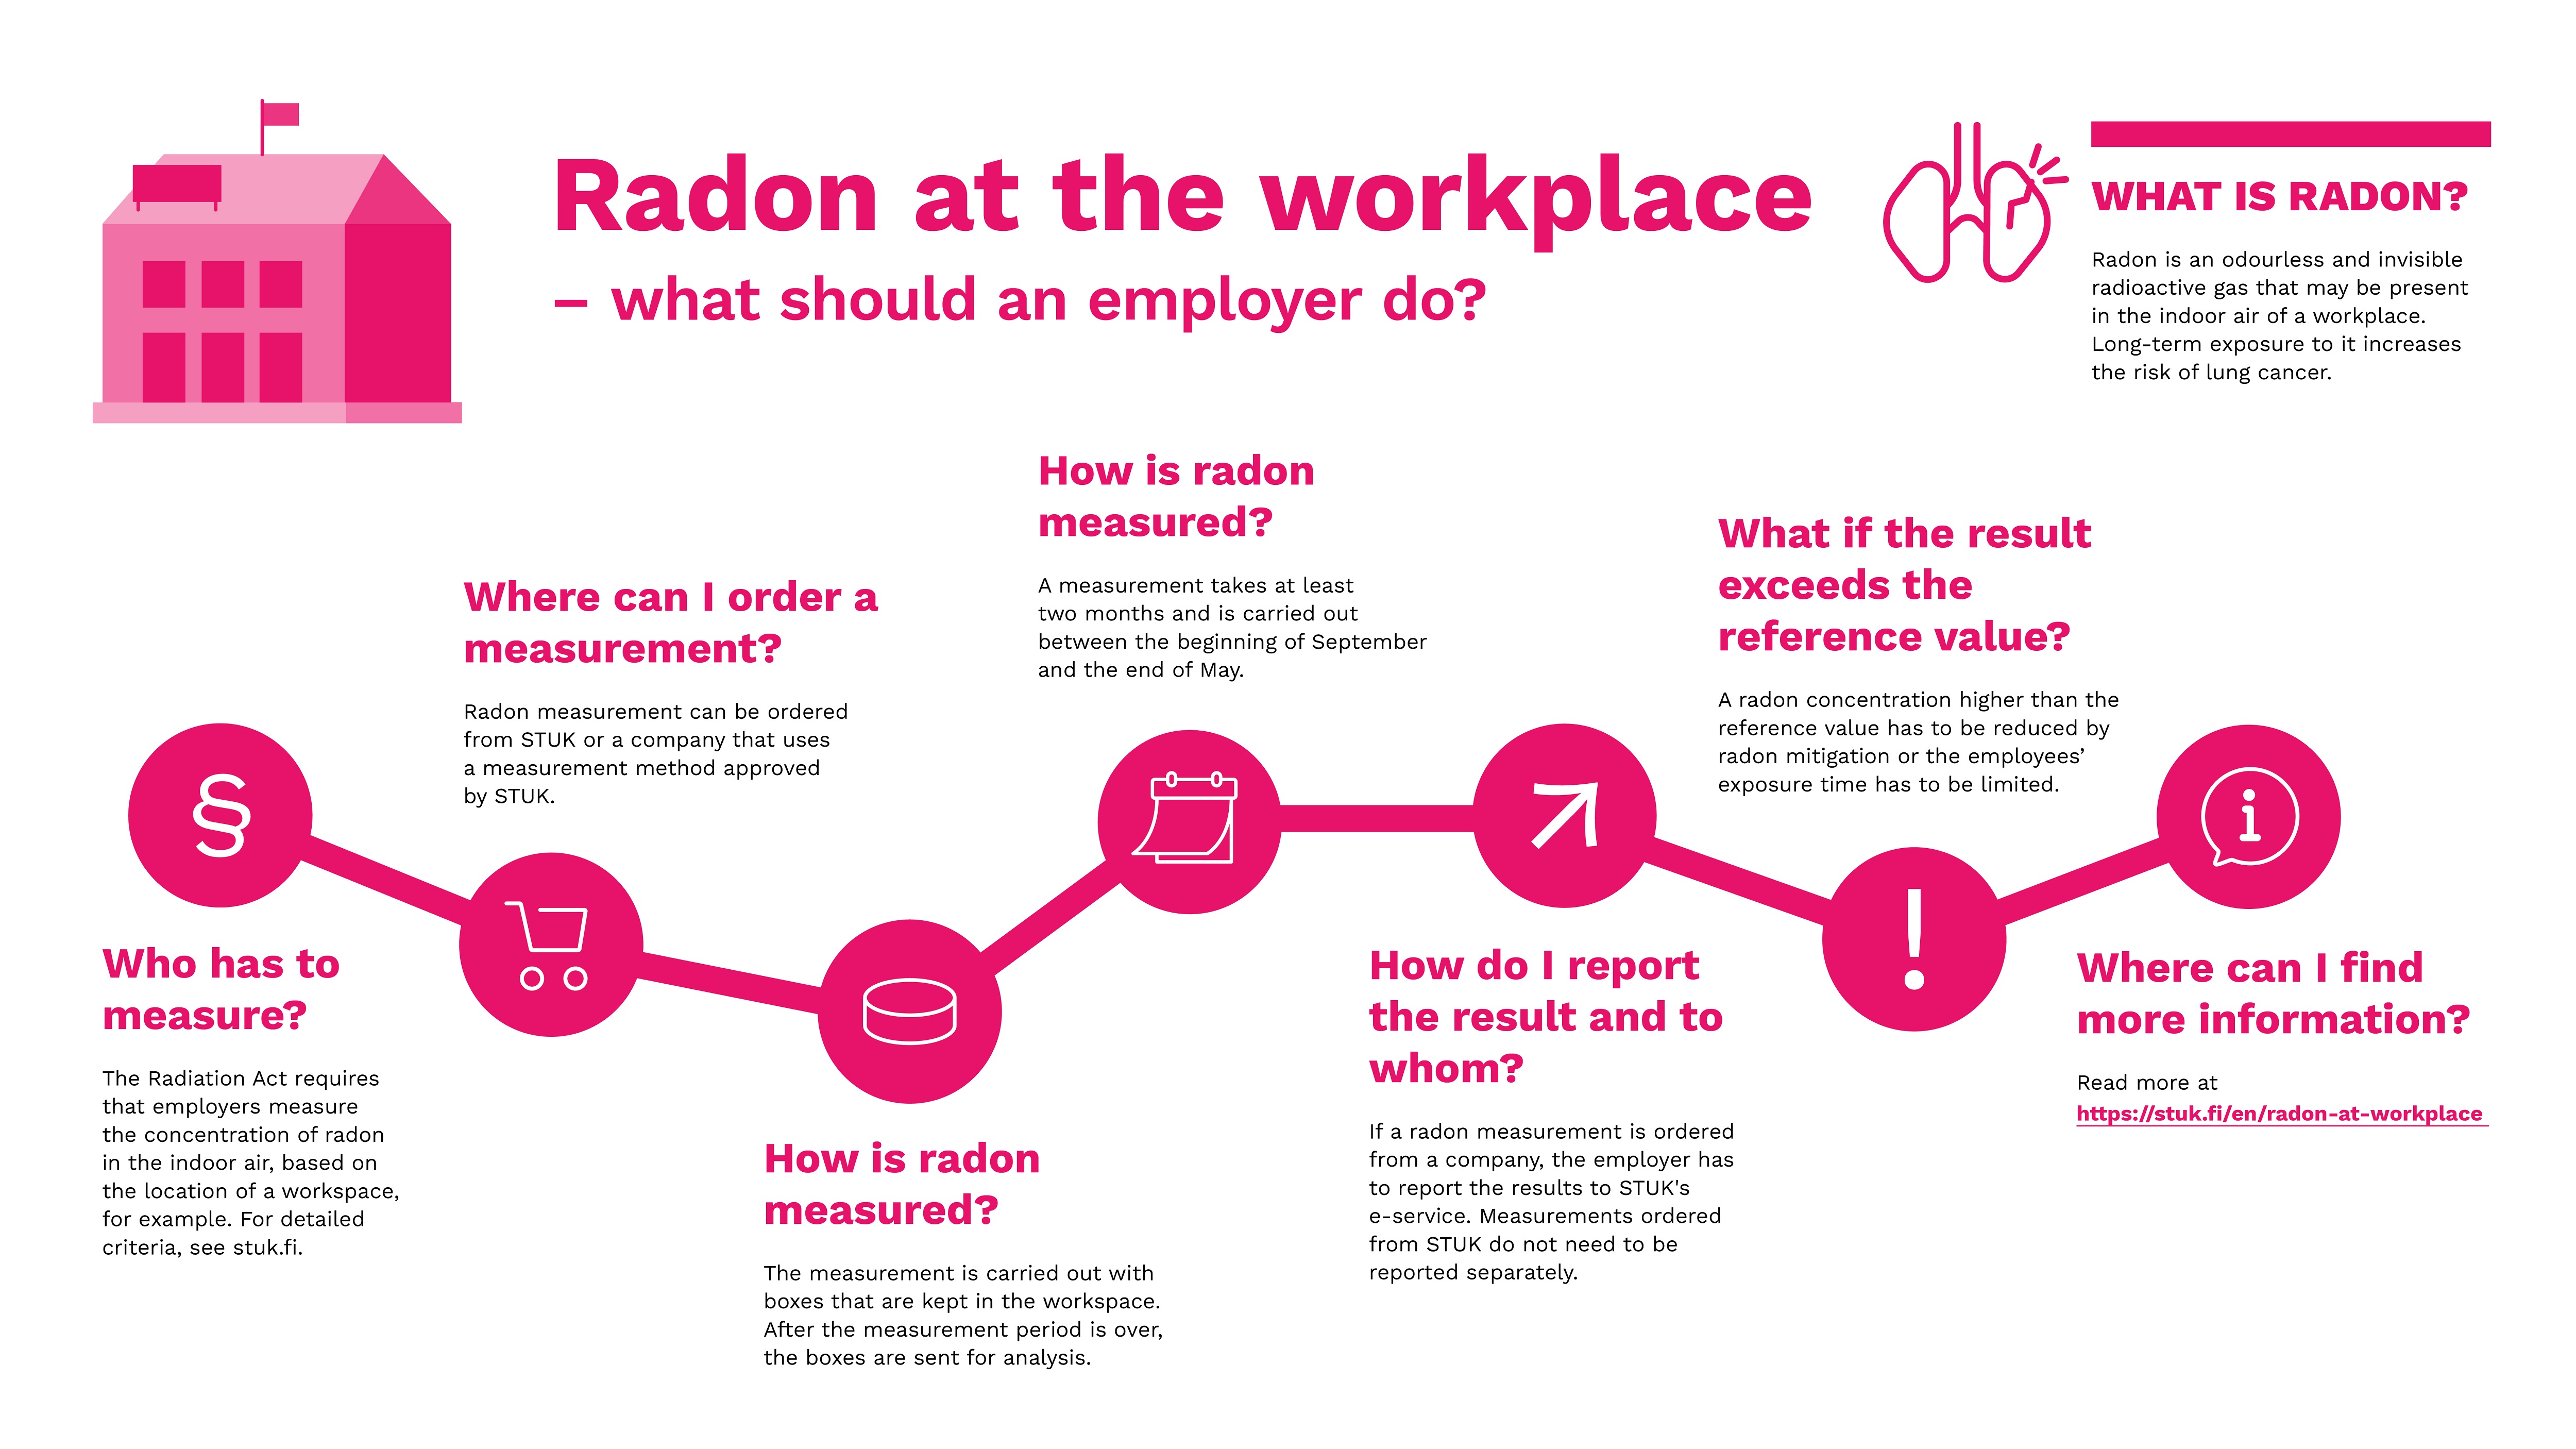 Radon at the workplace - what should an employer do? Infographic.